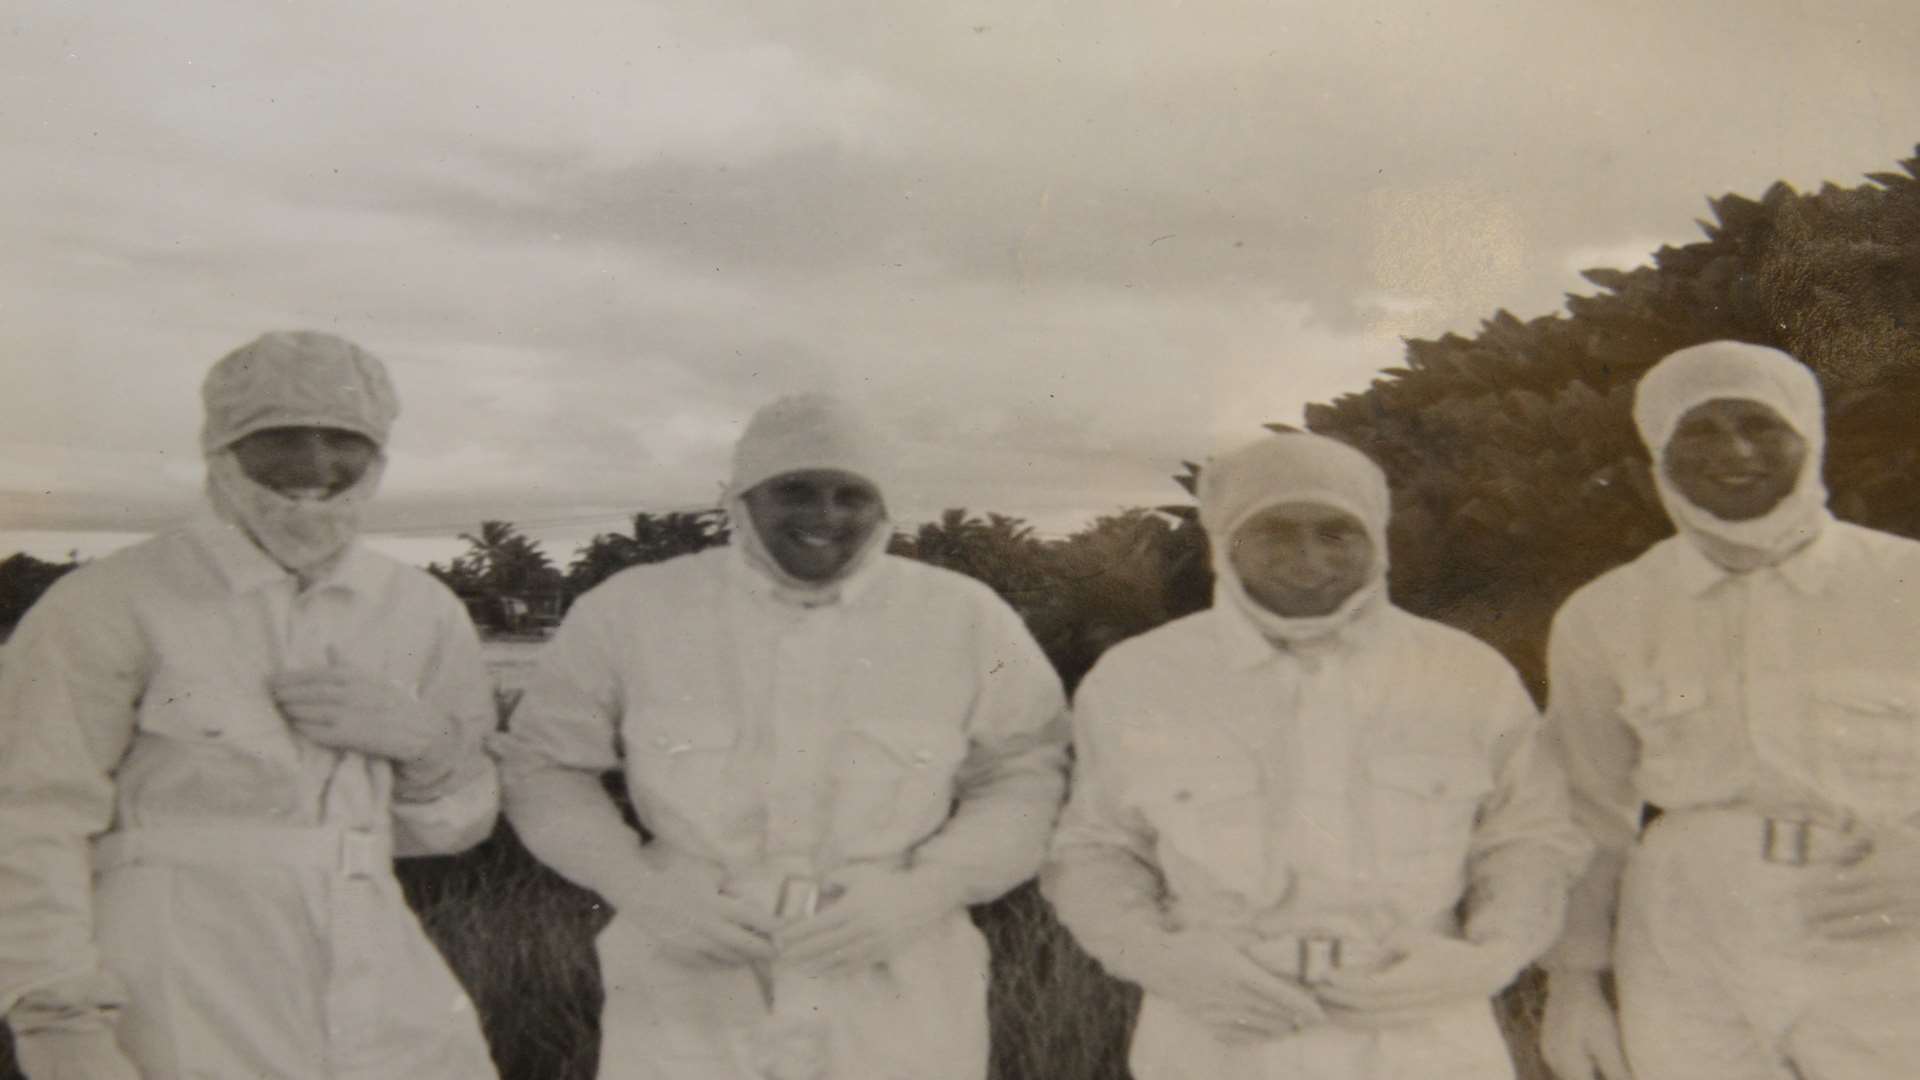 Don Harding (right) during his time on Christmas Island for the nuclear bomb testing